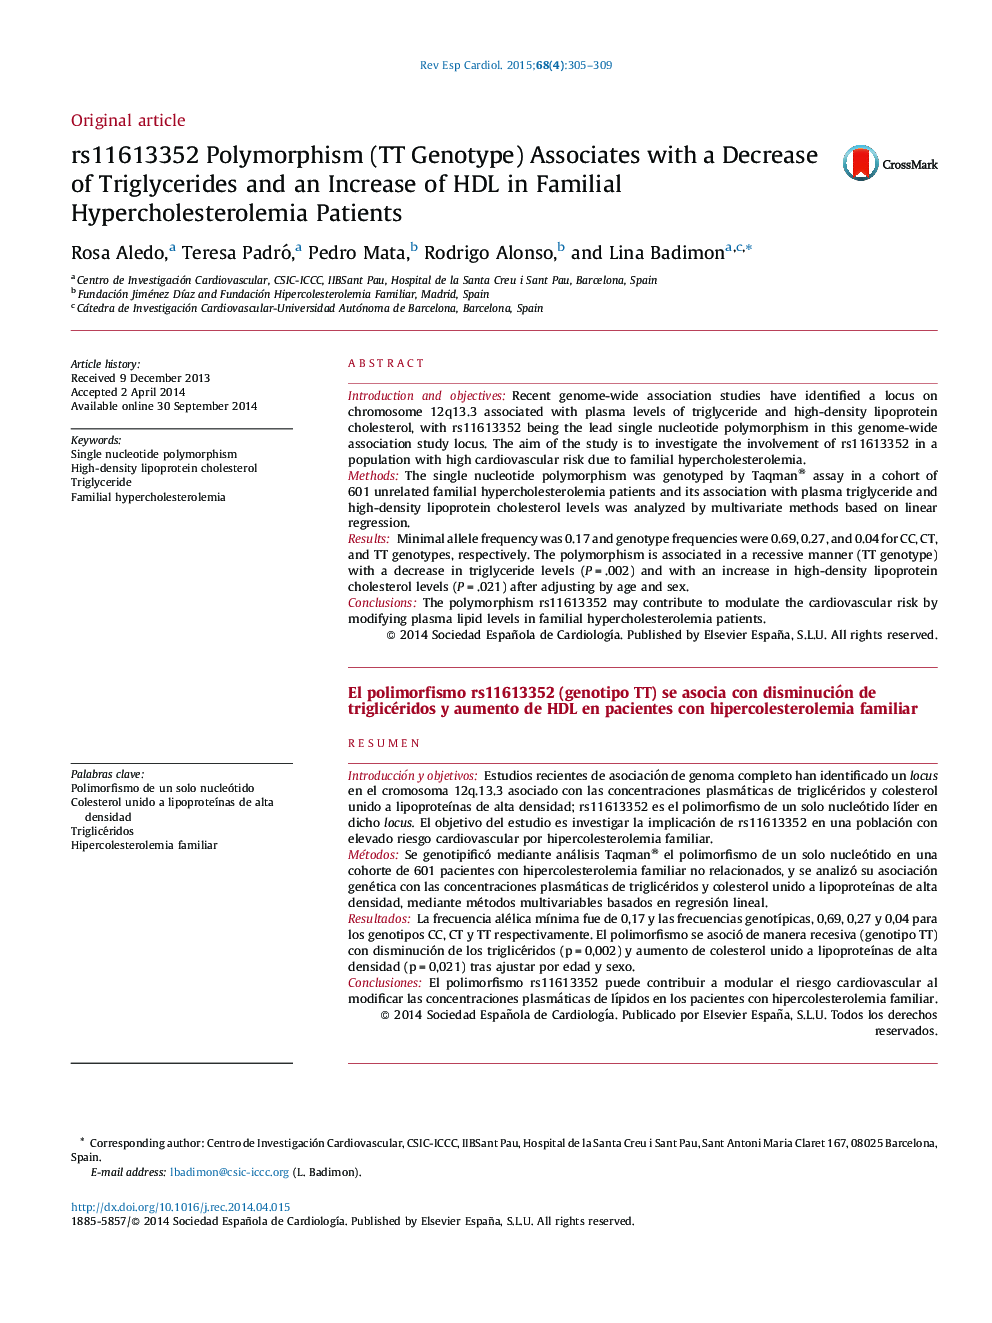 rs11613352 Polymorphism (TT Genotype) Associates with a Decrease of Triglycerides and an Increase of HDL in Familial Hypercholesterolemia Patients